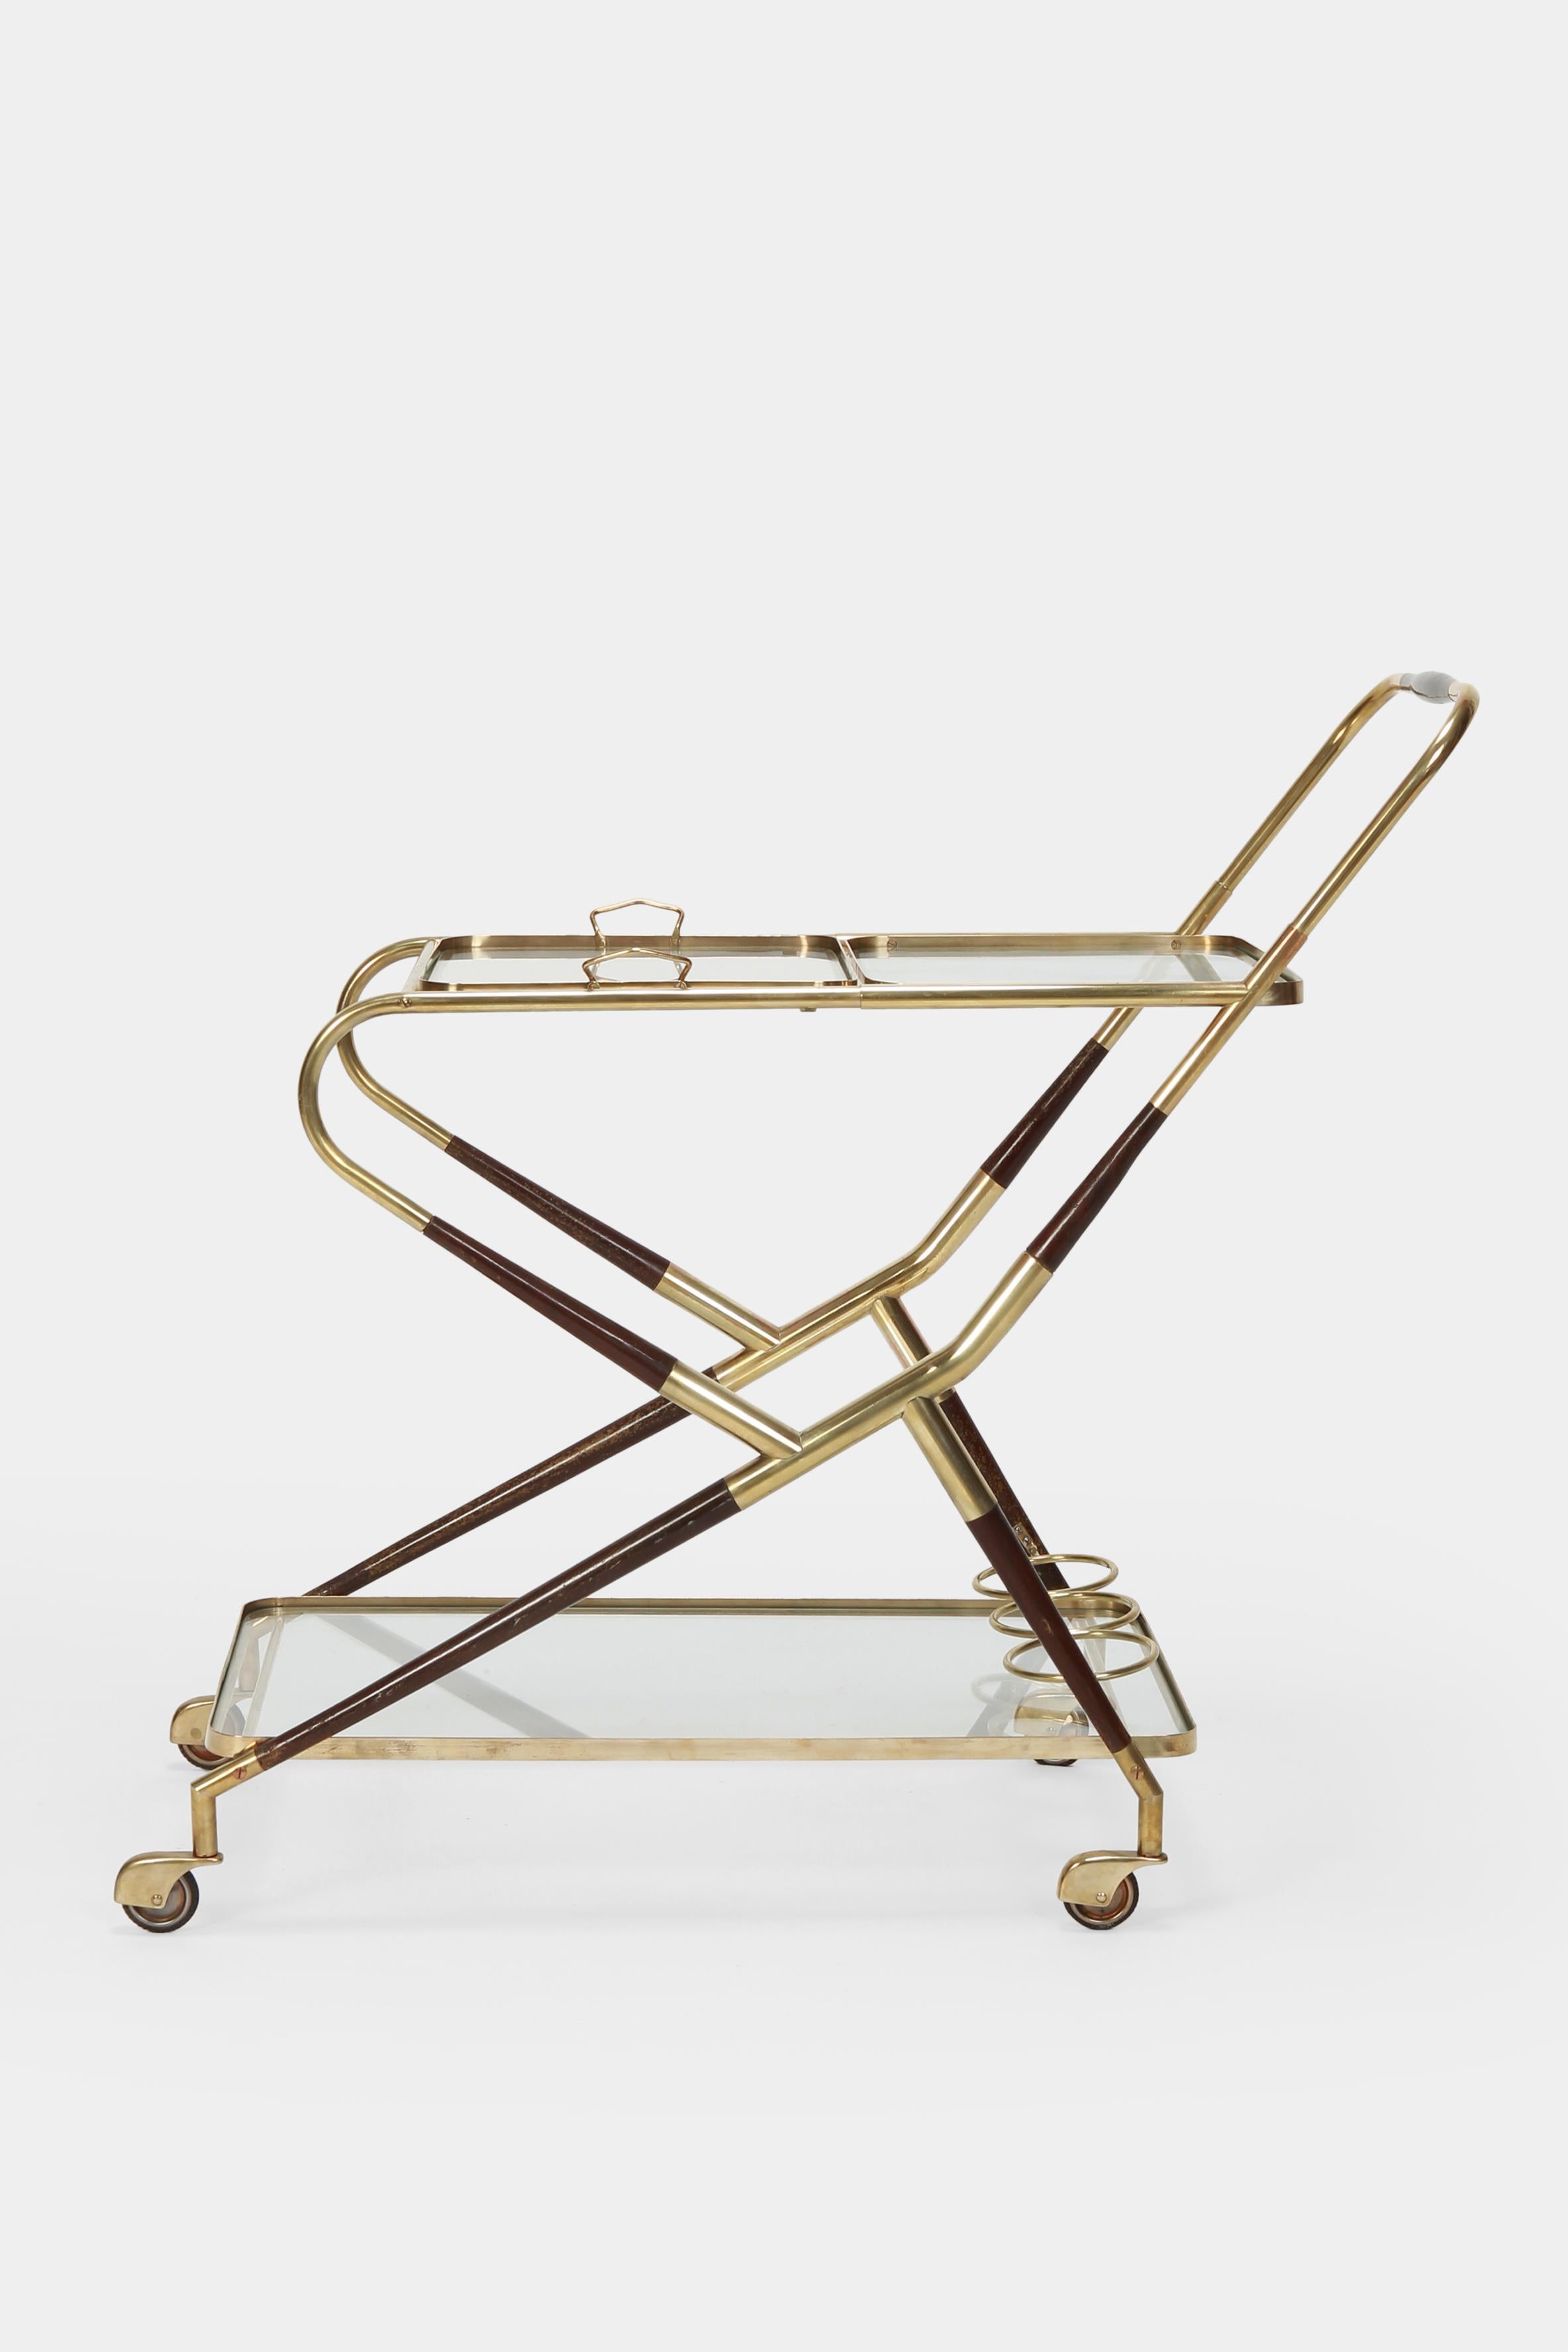 Brass Cesare Lacca Serving Trolley, 1950s For Sale